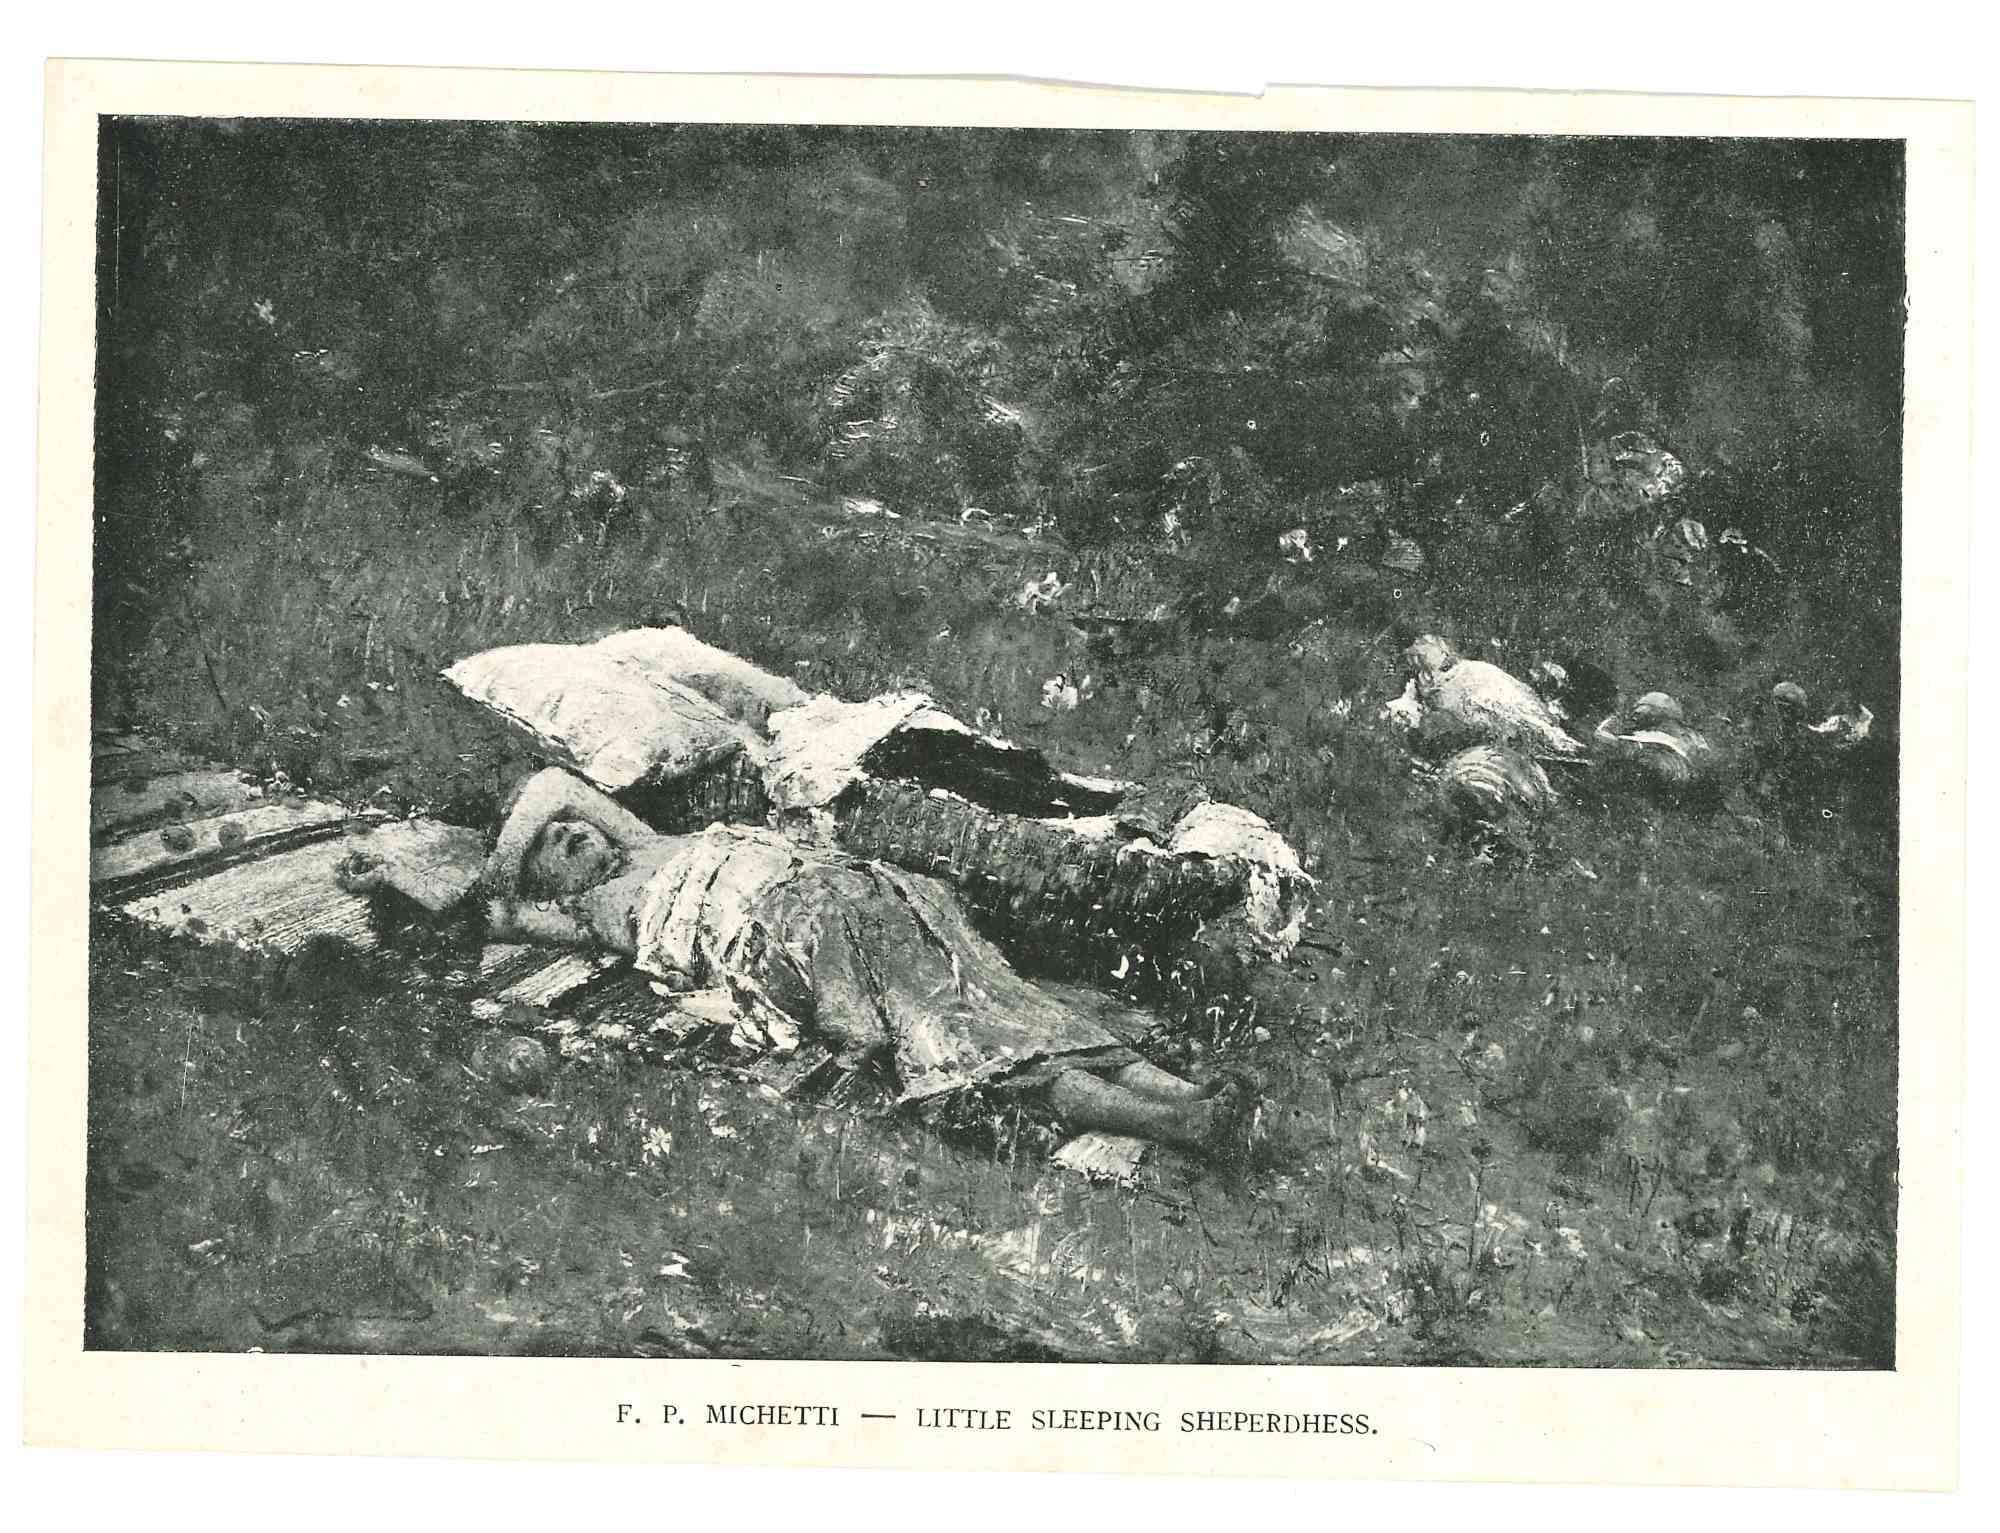 Unknown Figurative Photograph - Vintage Photo of Painting  -Little Sleeping Sheperdhess - Early 20th Century